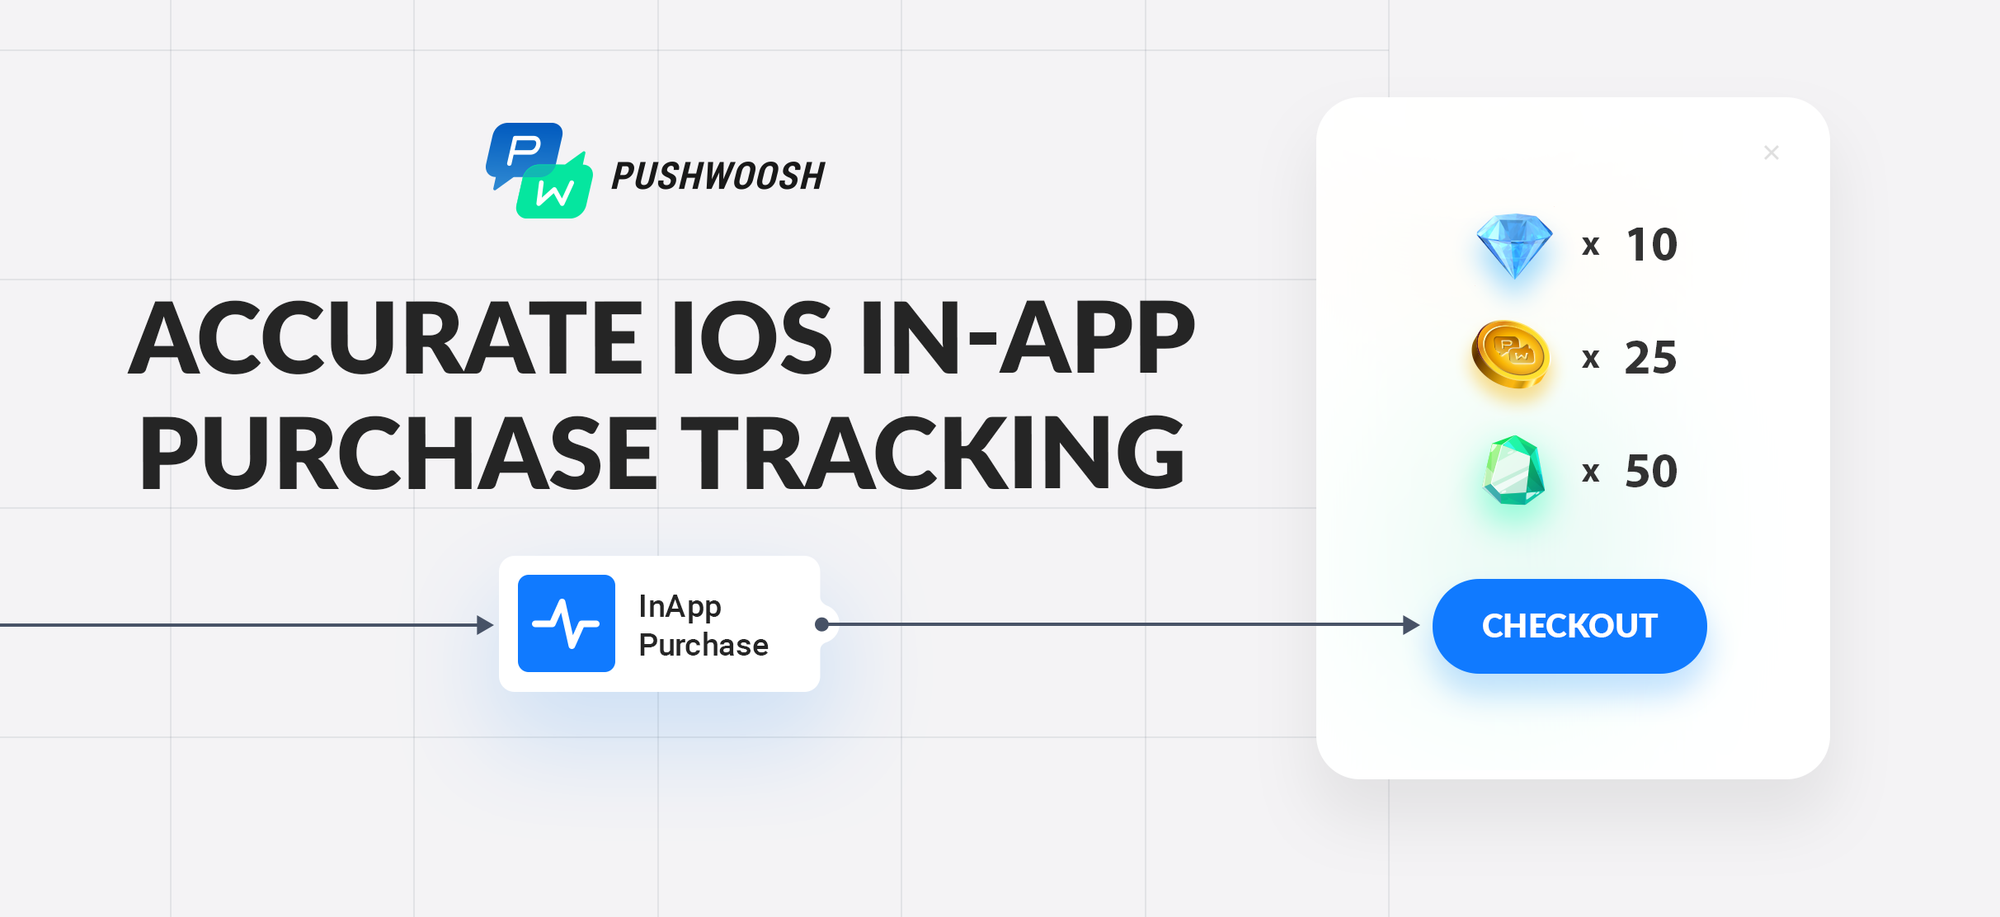 Out-of-the-Box Tracking of In-App Purchases in Pushwoosh: Assess and Enhance Your iOS App Monetization